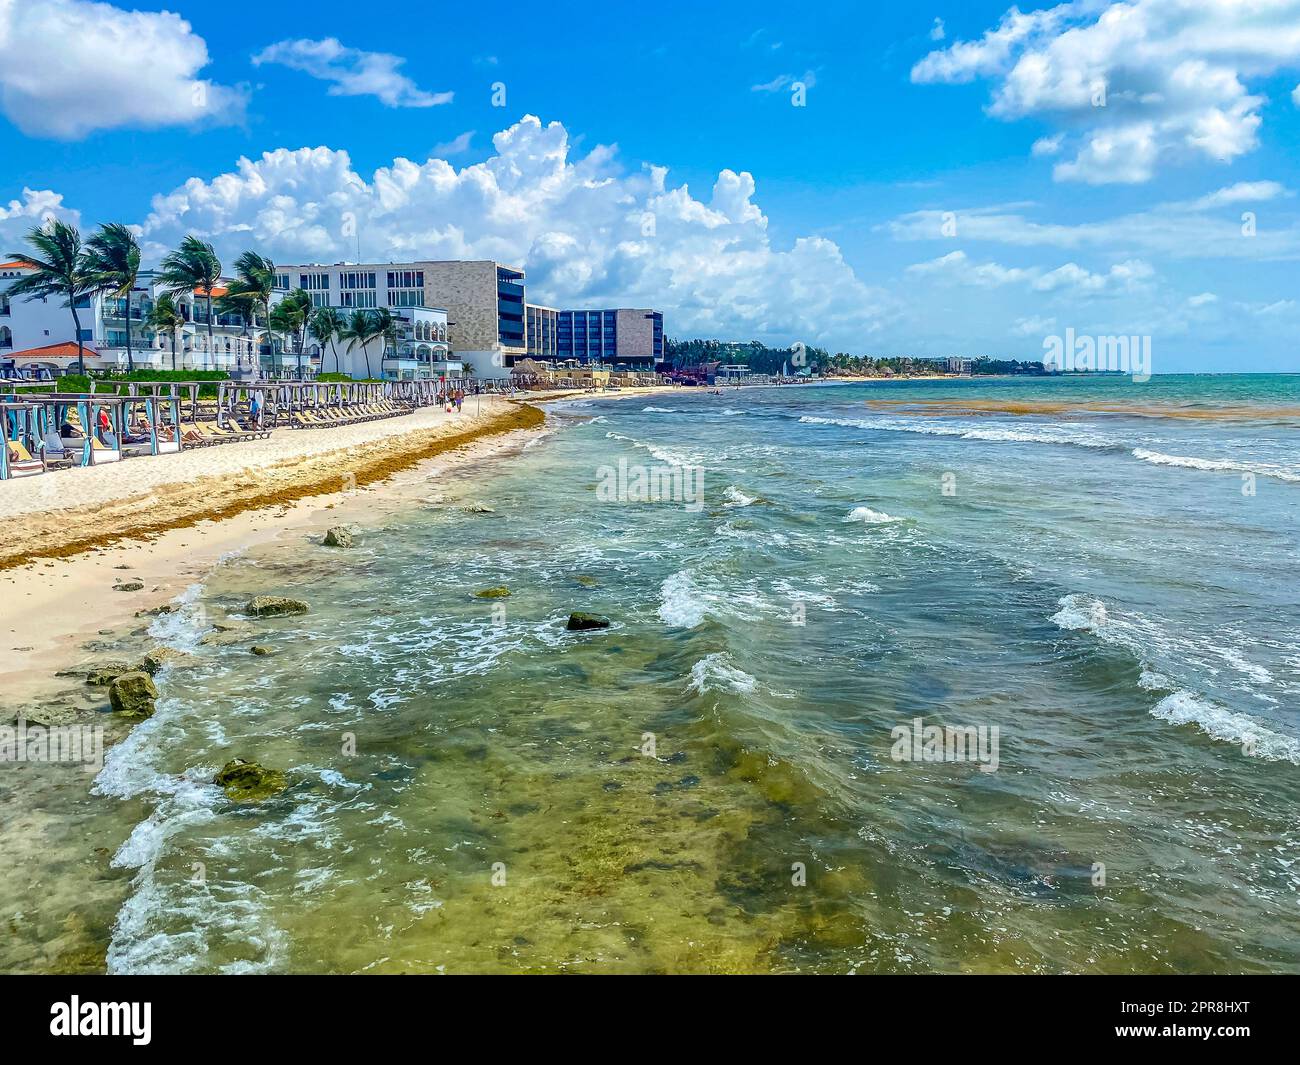 Tropical mexican beach full of people Playa del Carmen Mexico. Stock Photo